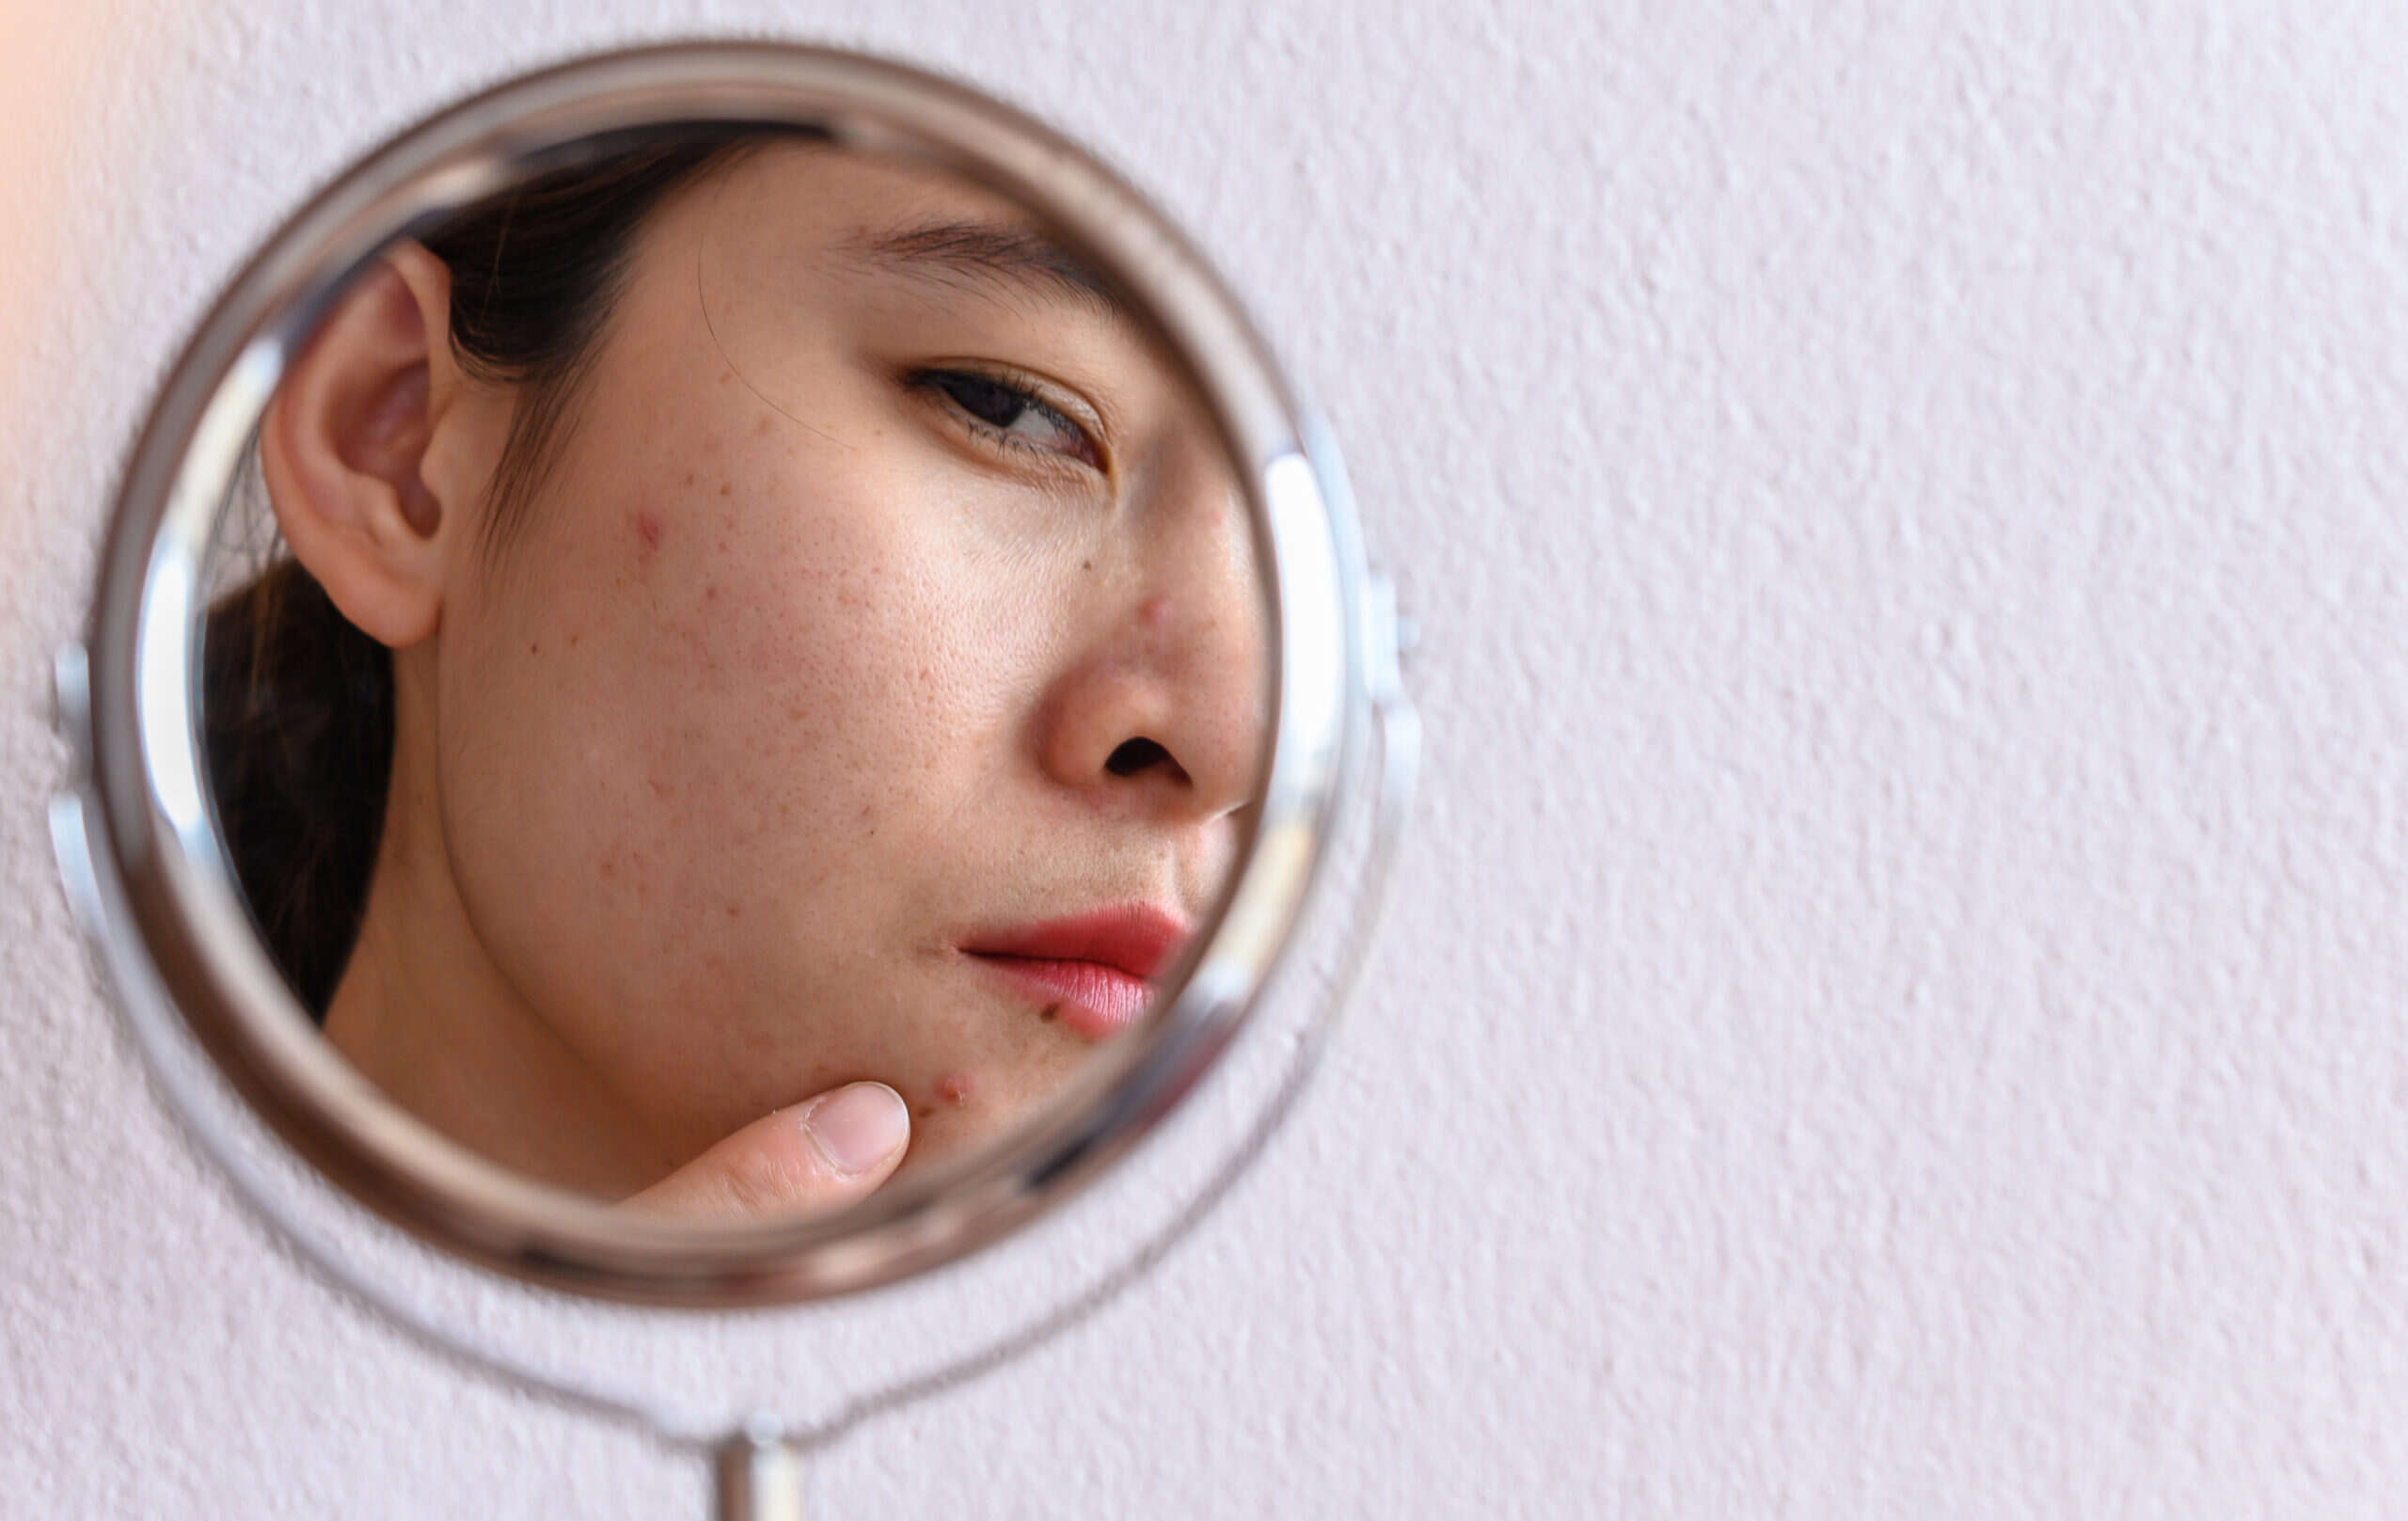 Skin of a woman affected with acne